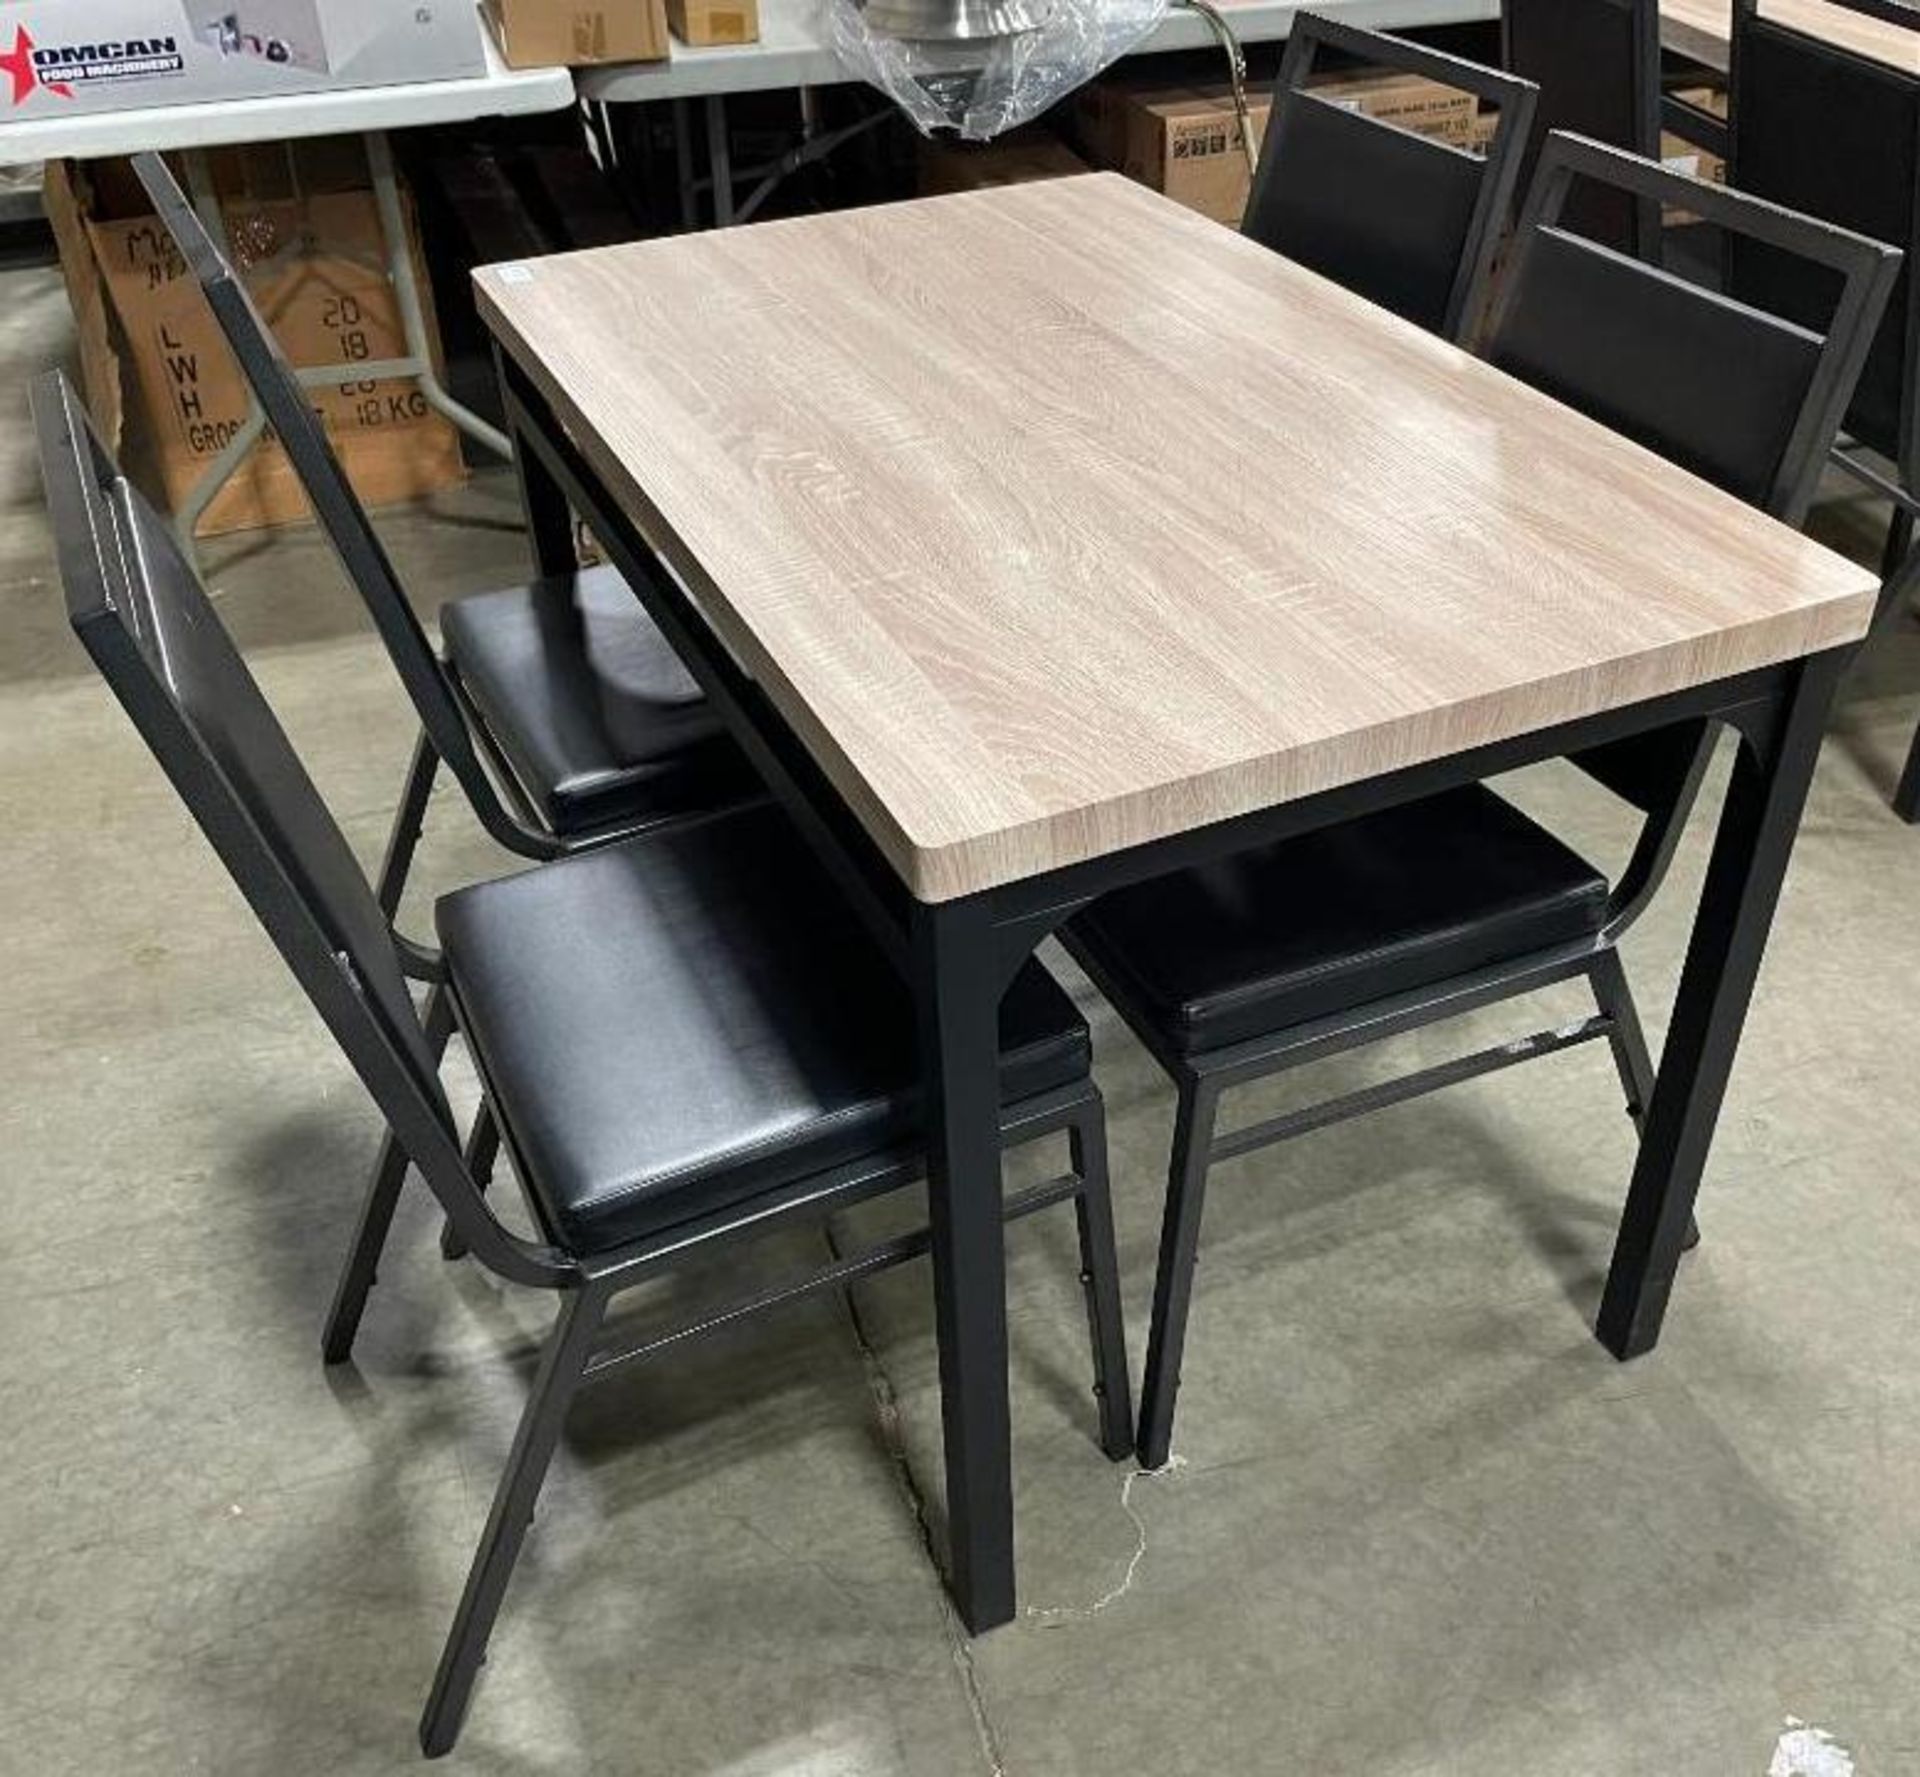 43.5" RECTANGLE RESTAURANT TABLE WITH (4) BELNICK STACKING BANQUET CHAIRS - Image 2 of 5